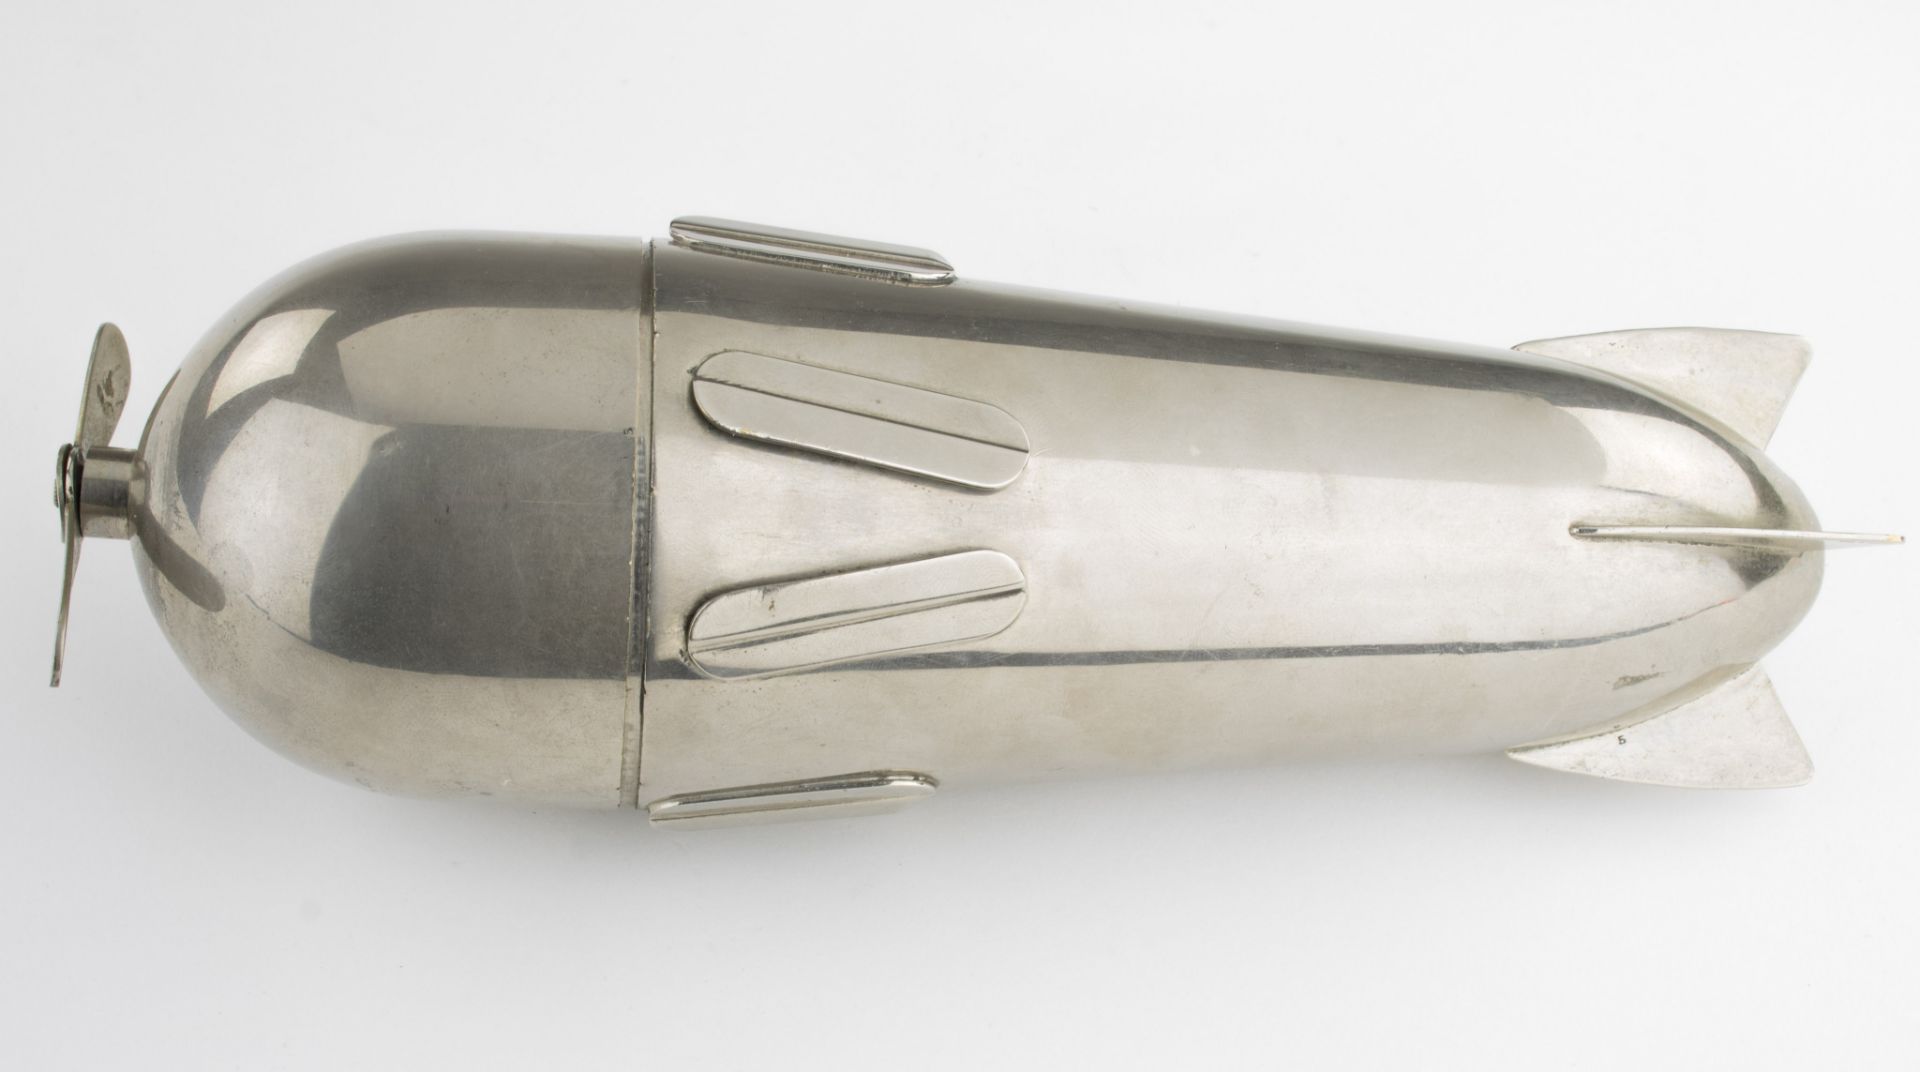 GERMAN ART DECO STYLIZED AIRPLANE COCKTAIL SHAKER AND TRAVEL BAR - Image 18 of 19